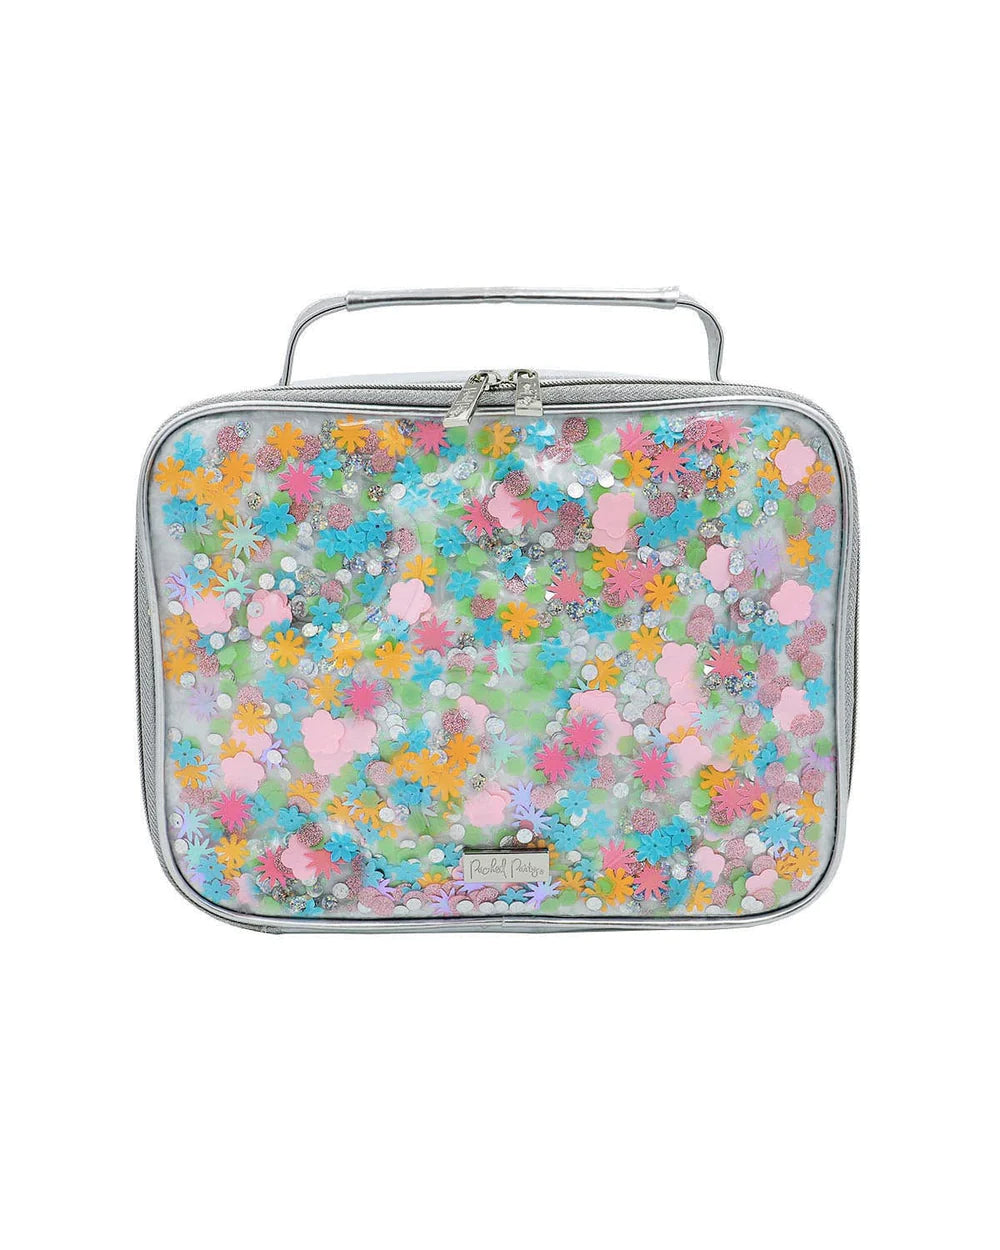 Flower shop confetti insulated lunch box-Little Fish Co.